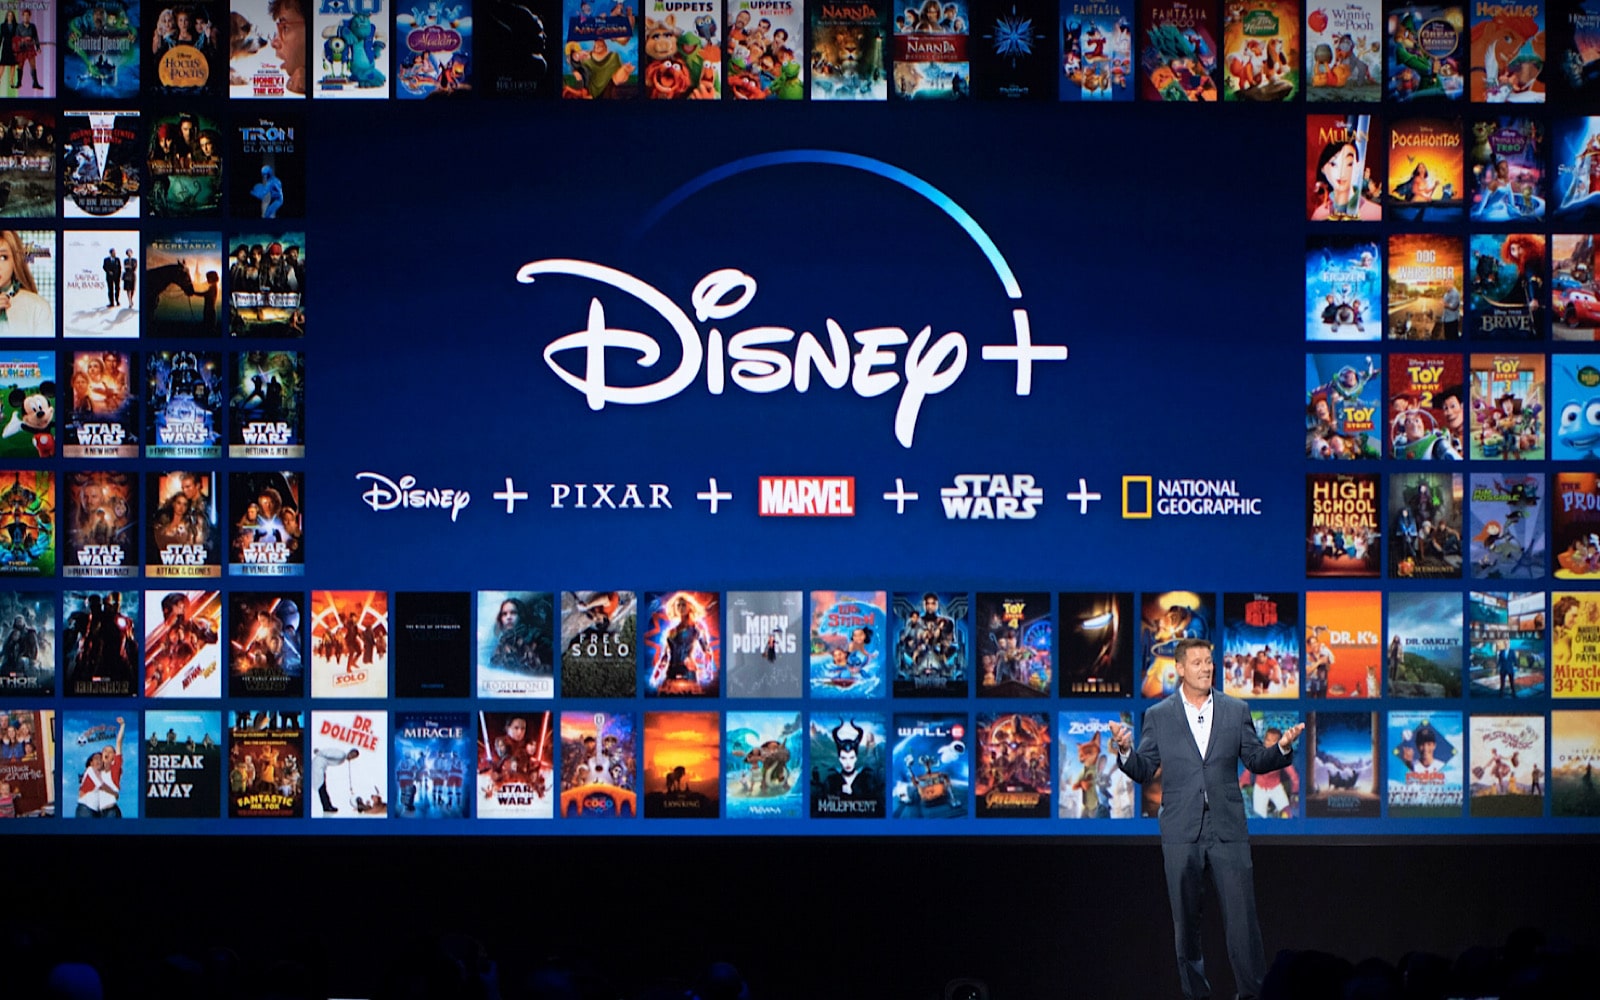 Disney+ launch slate announced At D23